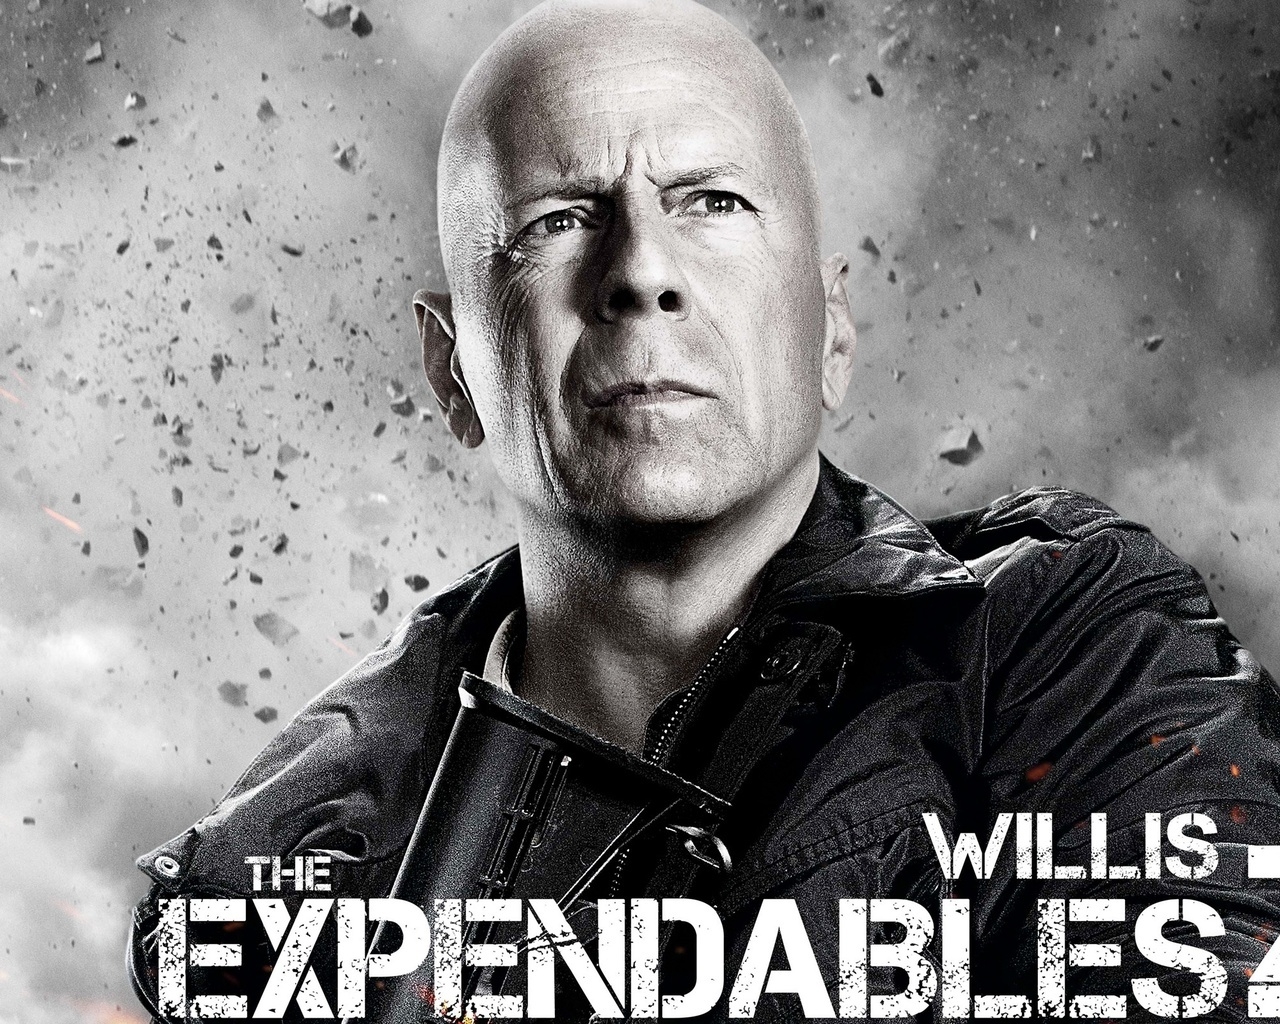 Bruce Willis Expendables 2 for 1280 x 1024 resolution